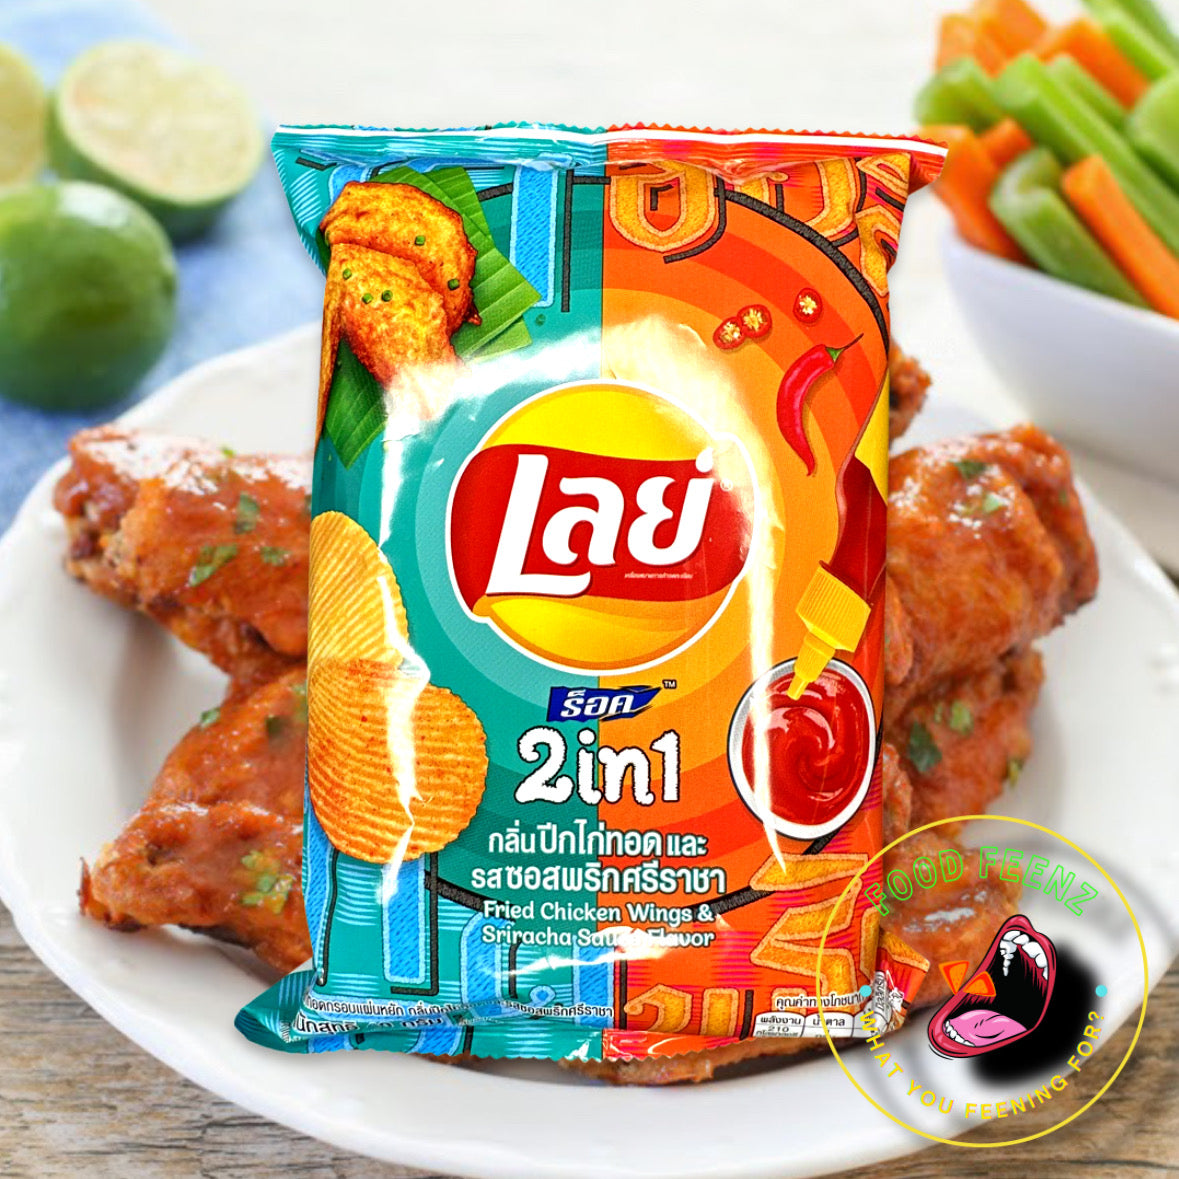 Lay's 2 in 1 Fried Chicken Wings & Sriracha Sauce Flavor (Thailand)